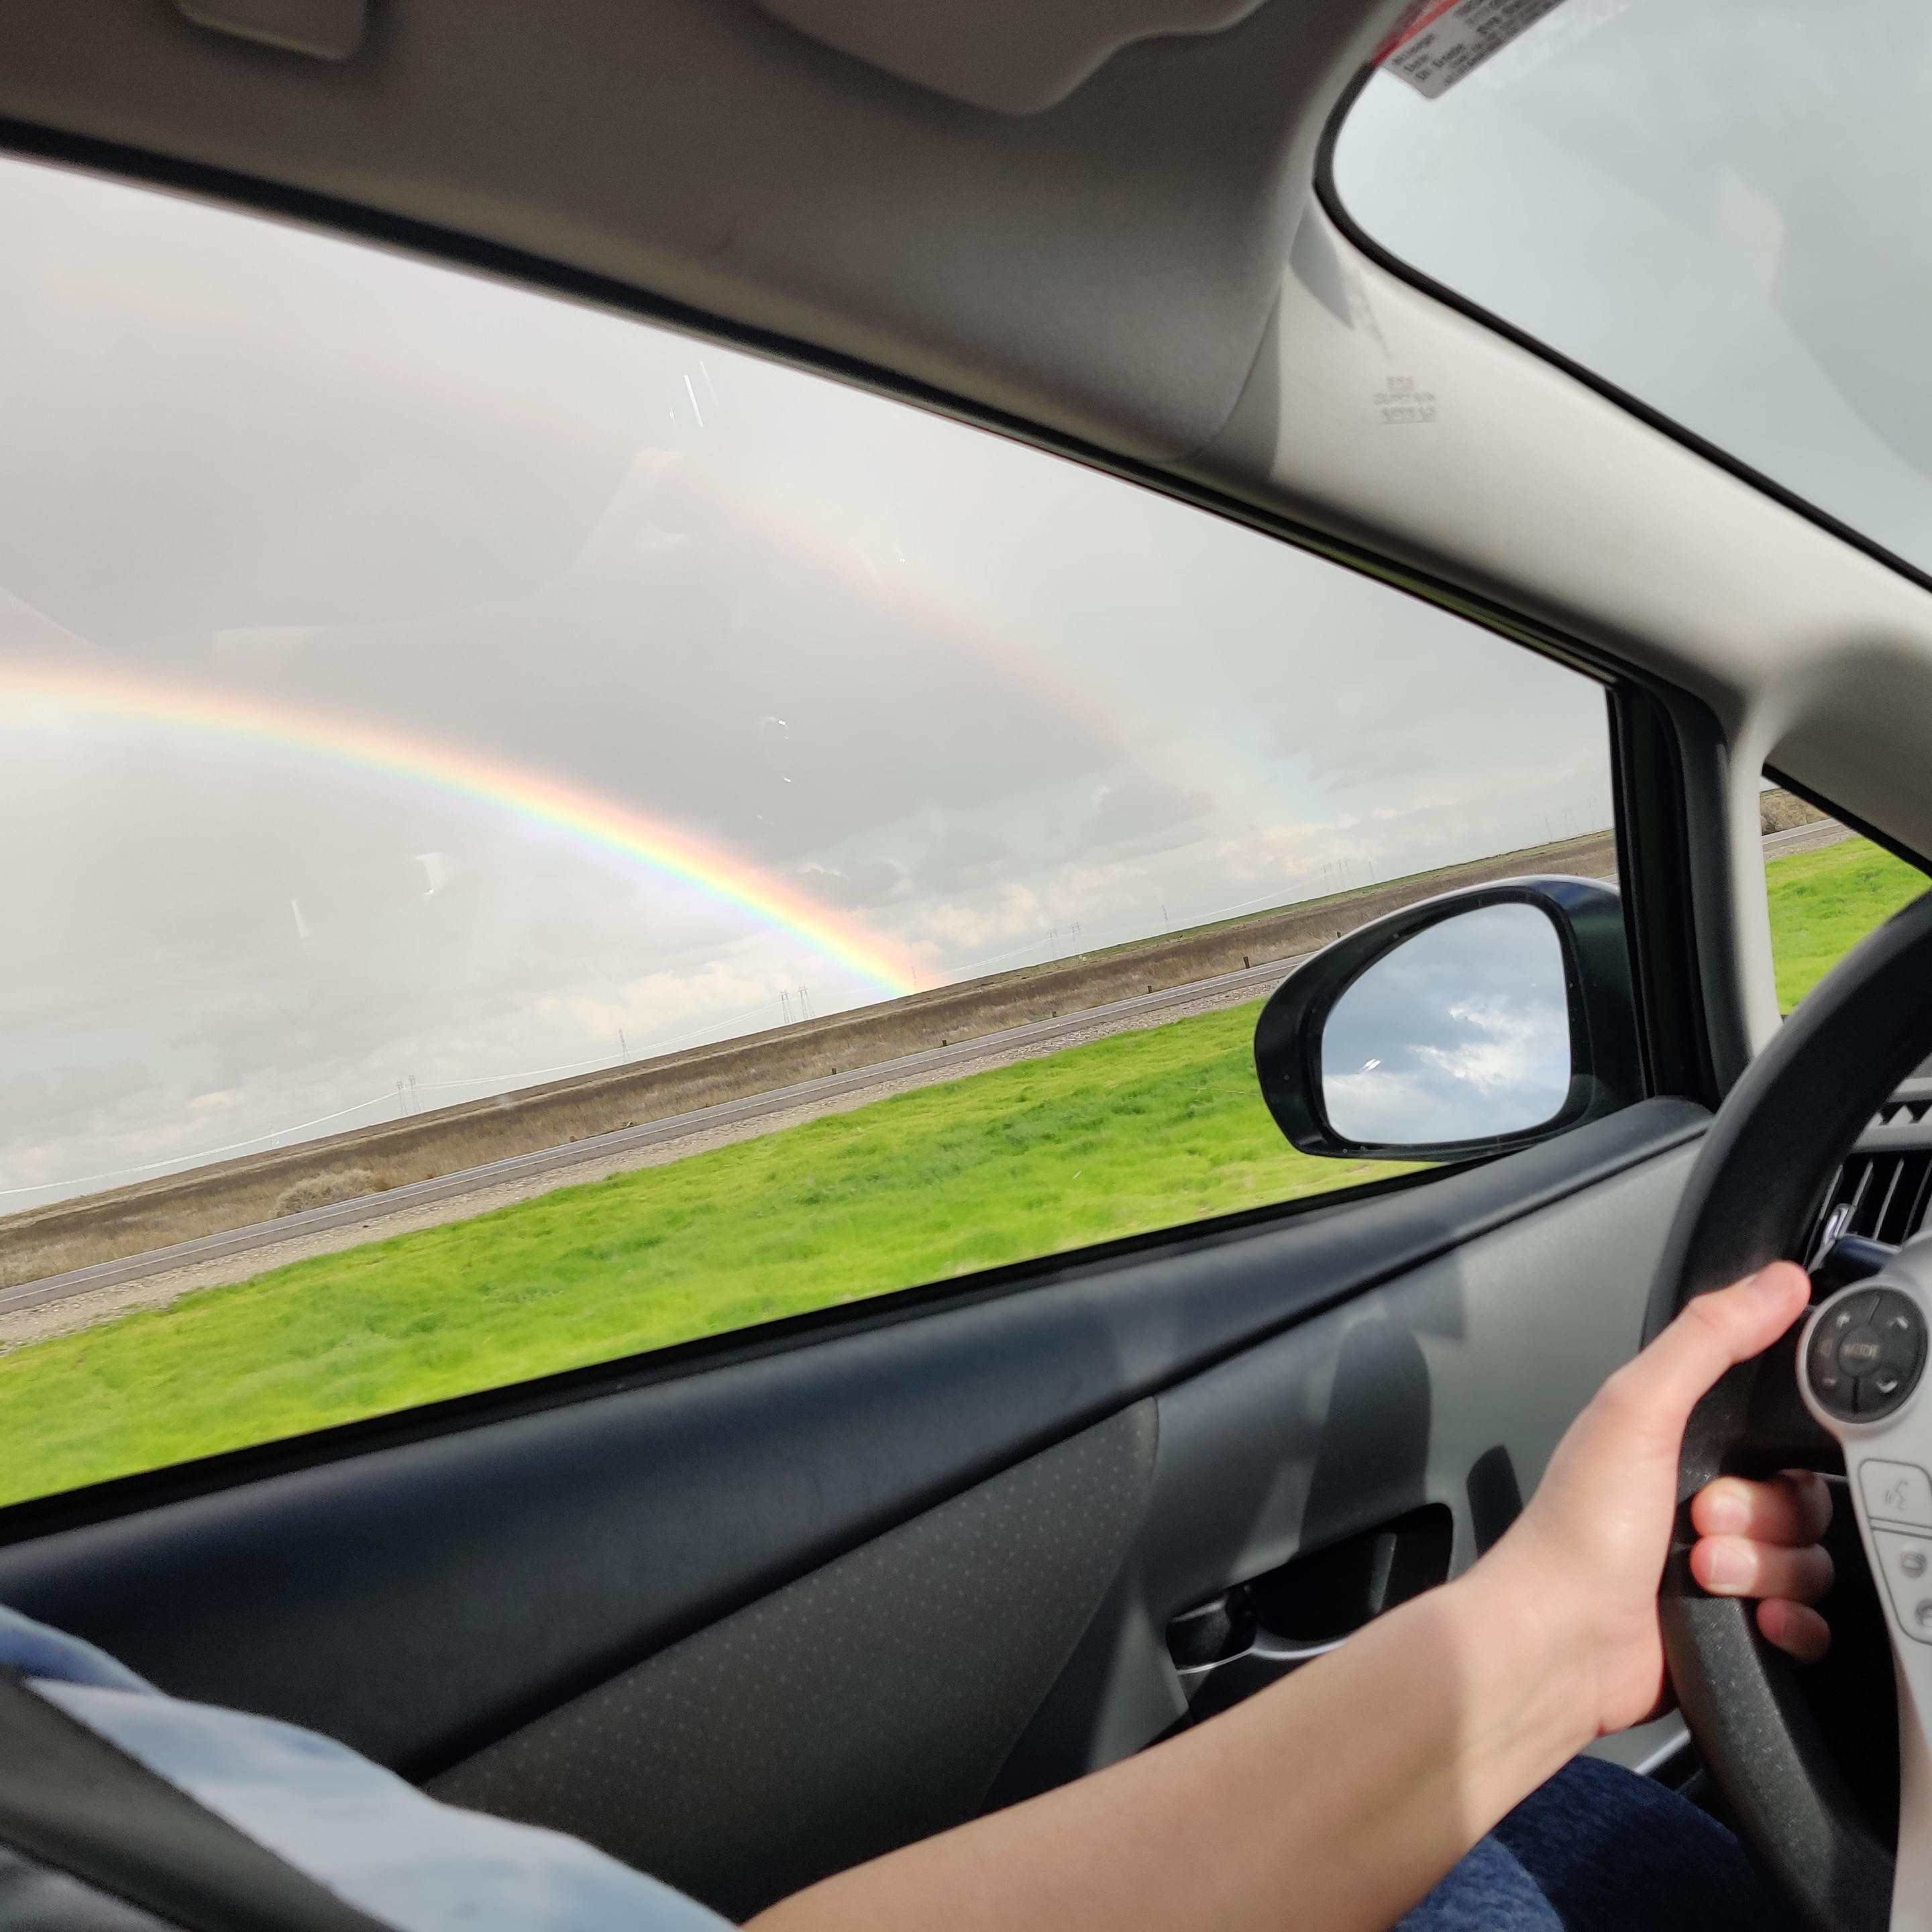 Double rainbow arc. Photo taken from passenger seat or driver's window in California